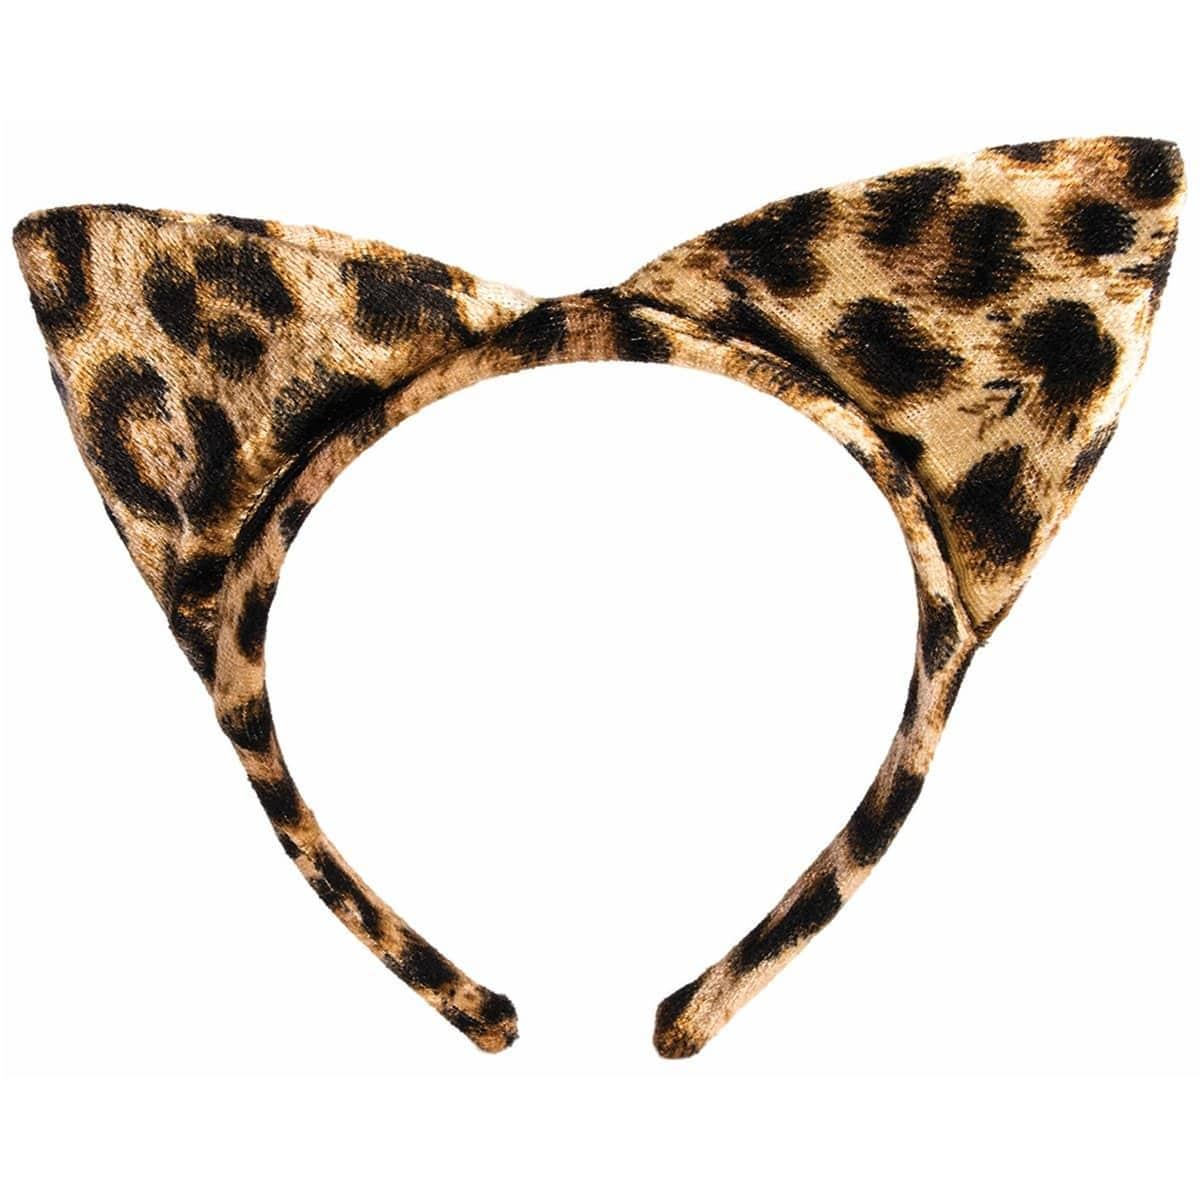 Buy Costume Accessories Leopard ears headband for adults sold at Party Expert